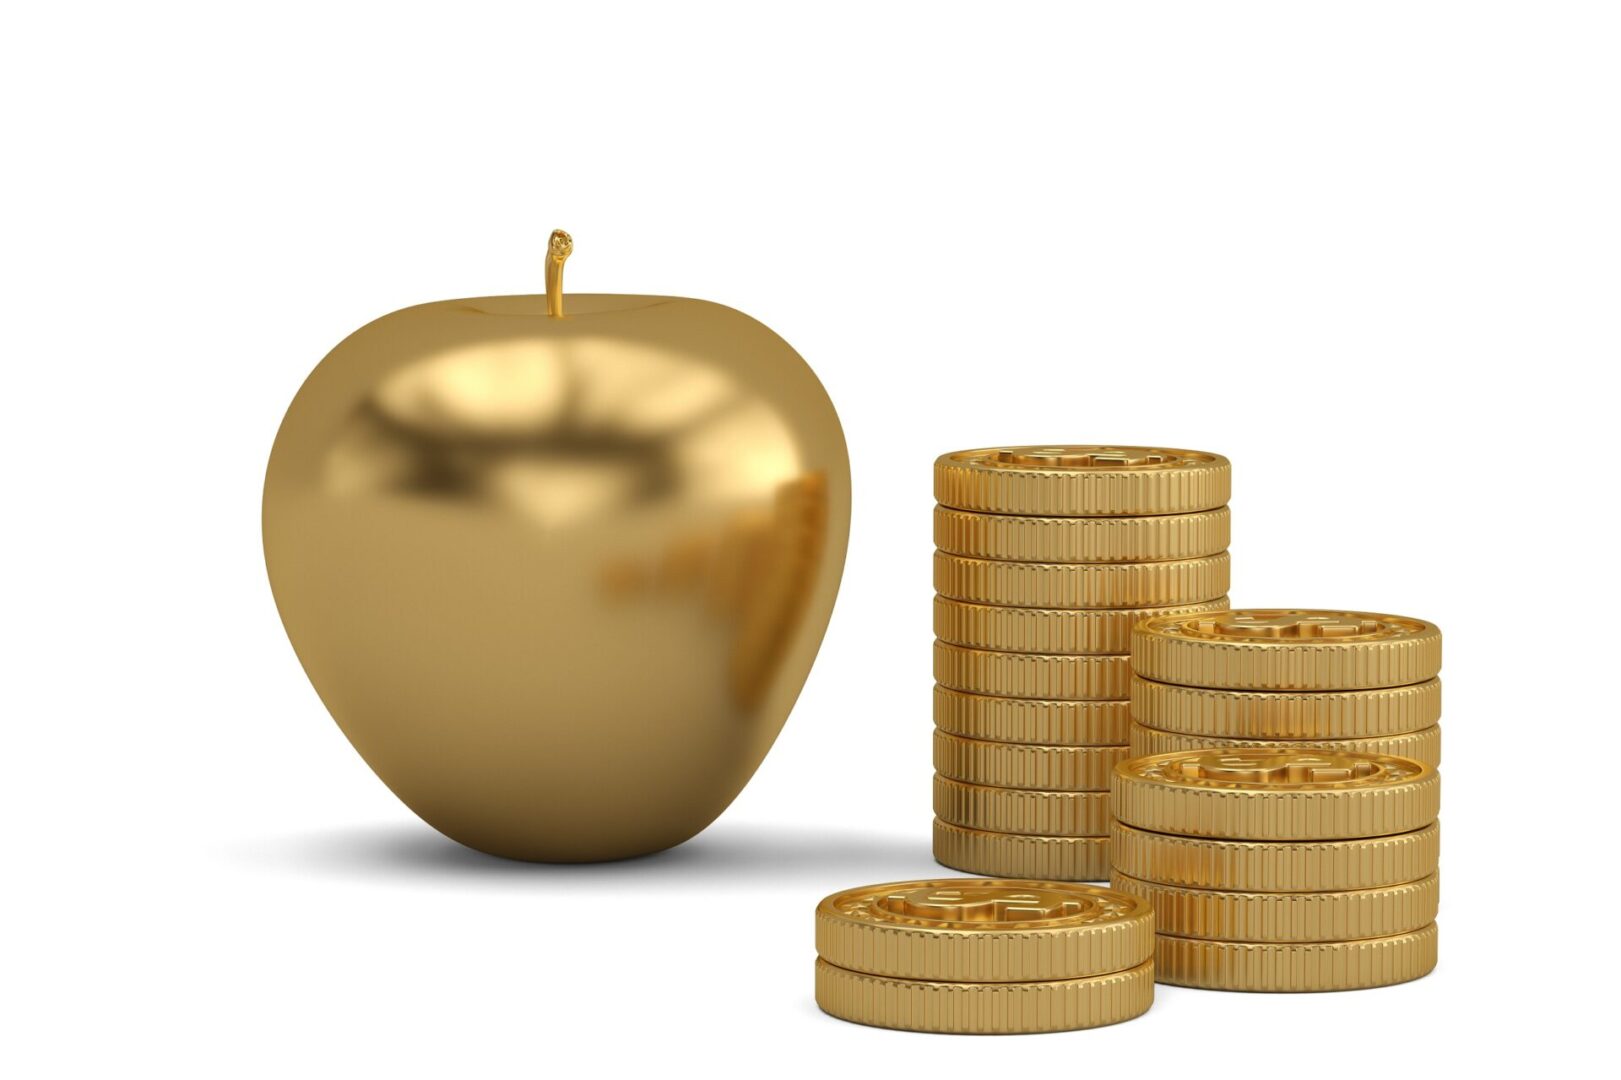 A golden apple sitting next to stacks of coins.